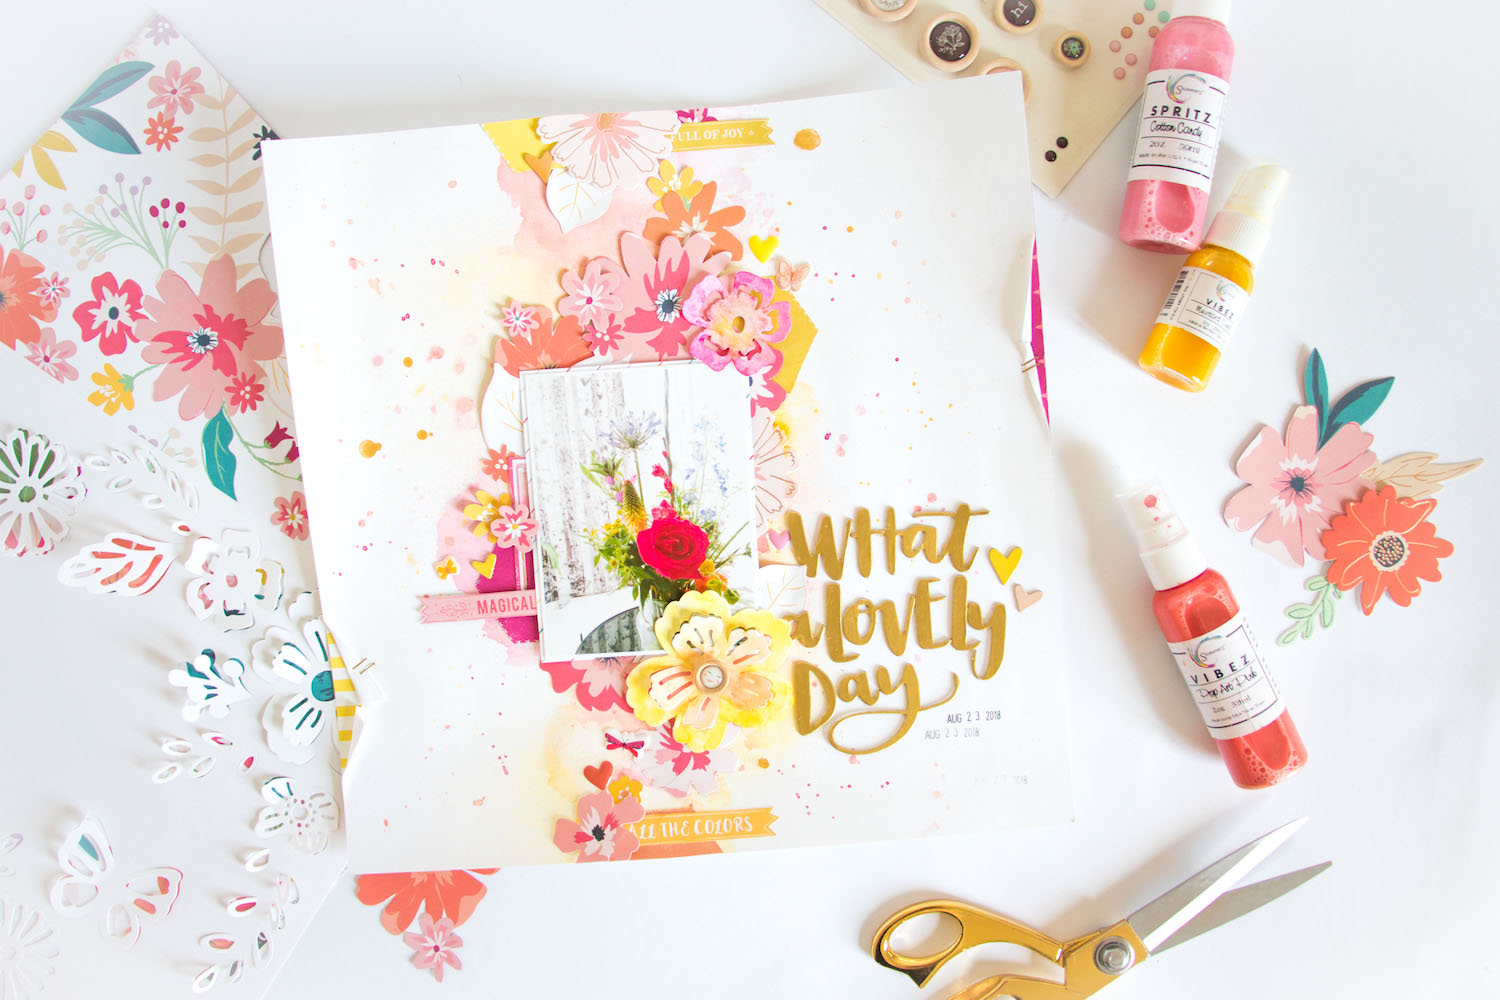 Lovely Day by ScatteredConfetti. // #scrapbooking #hipkitclub #pinkpaislee